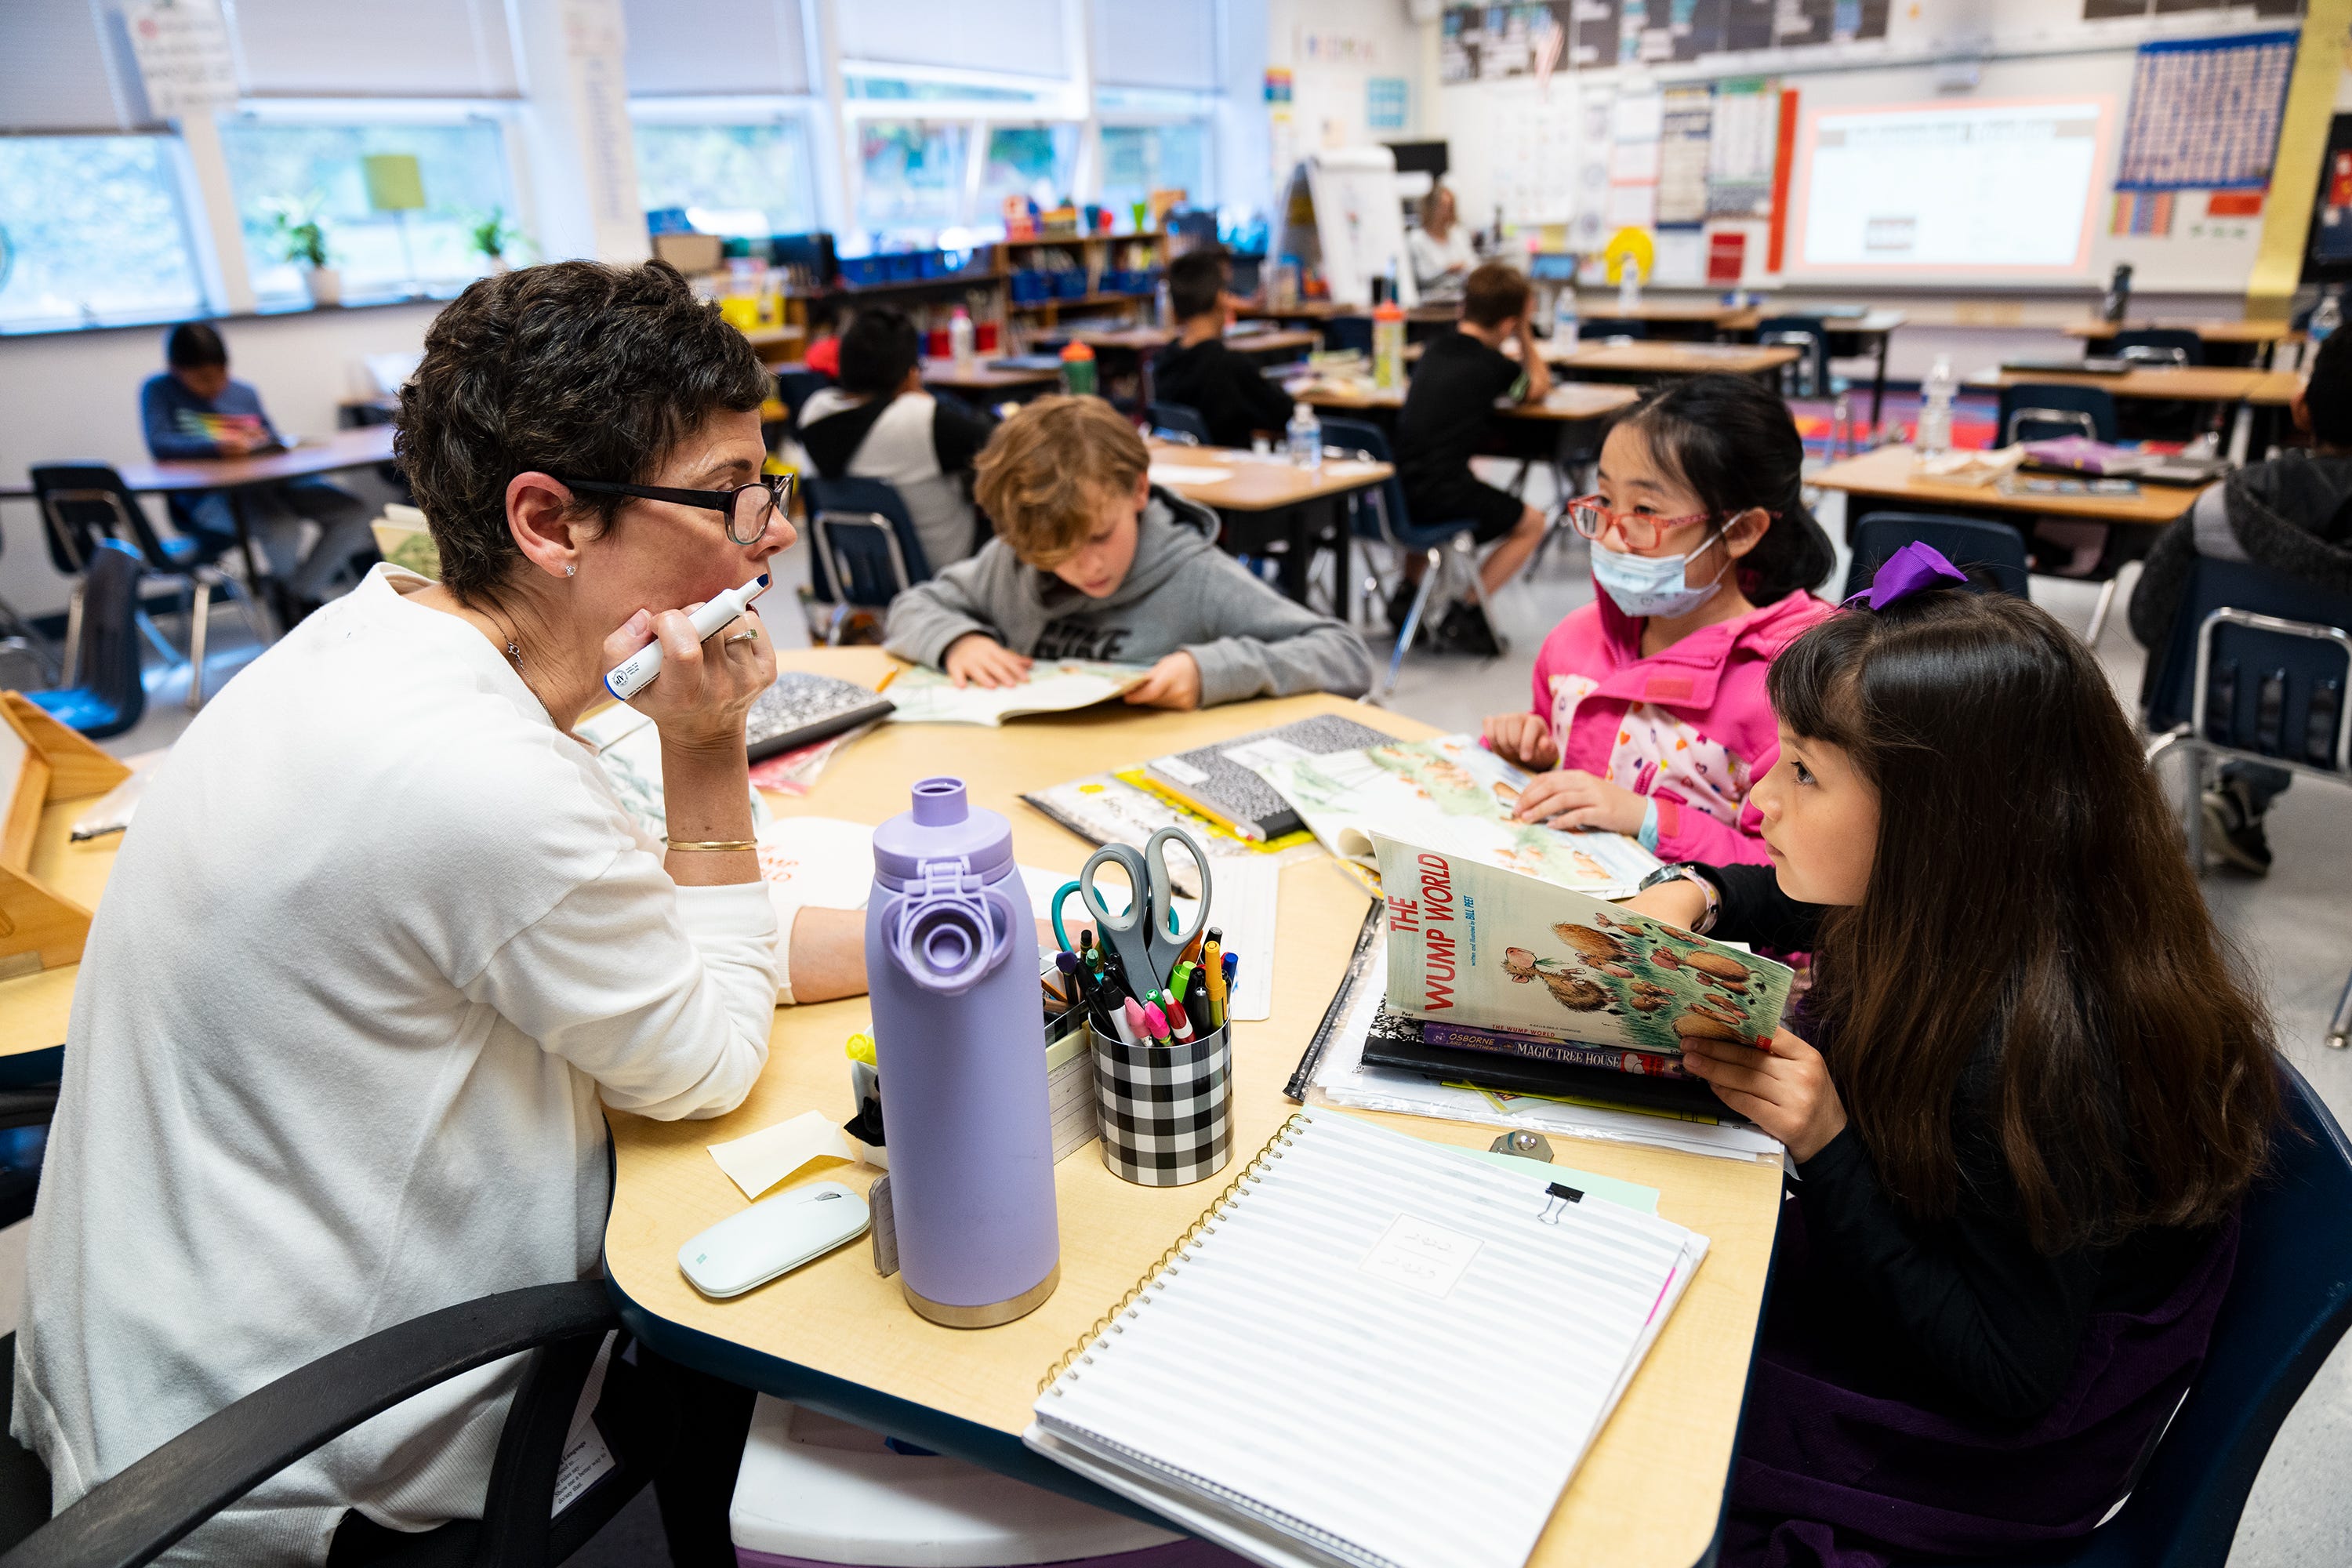 Lisa Cay, a third grade teacher at Sleepy Hollow Elementary School in Falls Church, Va., goes over a reading lesson with her students.